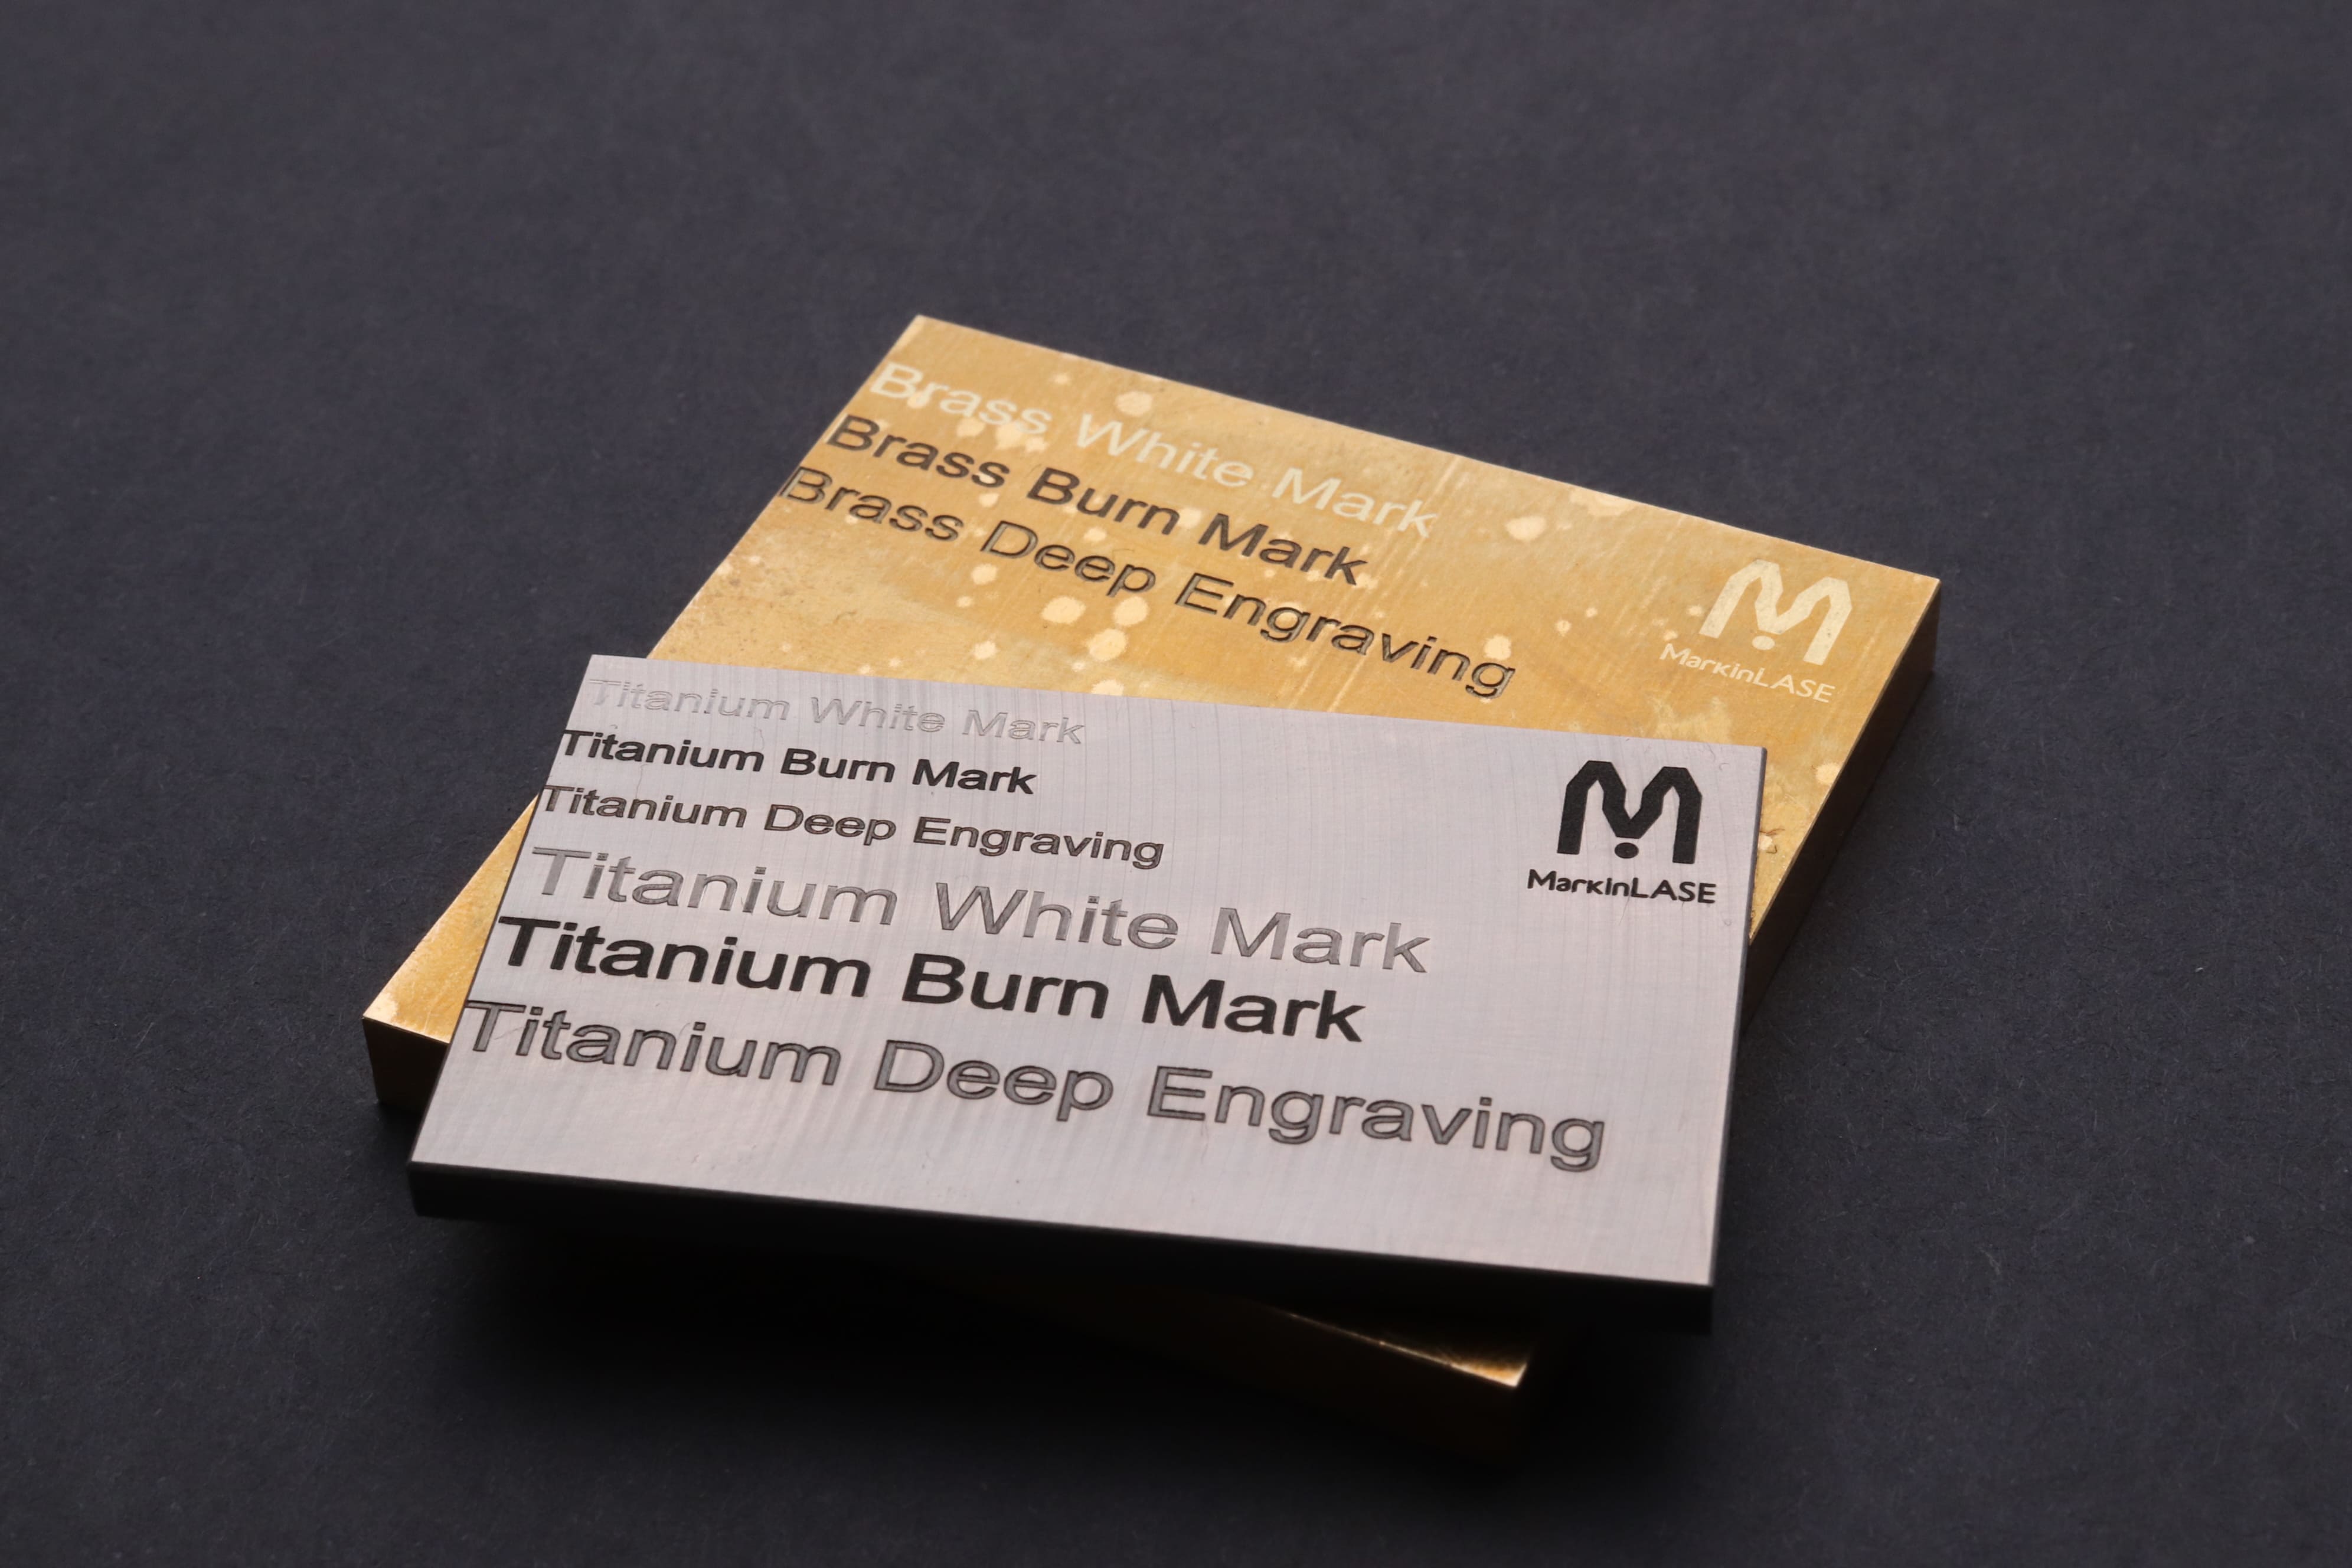 Image of 2 thick plates of titanium and brass materials with MarkinLase logo for all and 'Titanium White Mark, Titanium Burn Mark, Titanium Deep Engraving' and 'Brass White Mark, Brass Burn Mark, Brass Deep Engraving' for each.